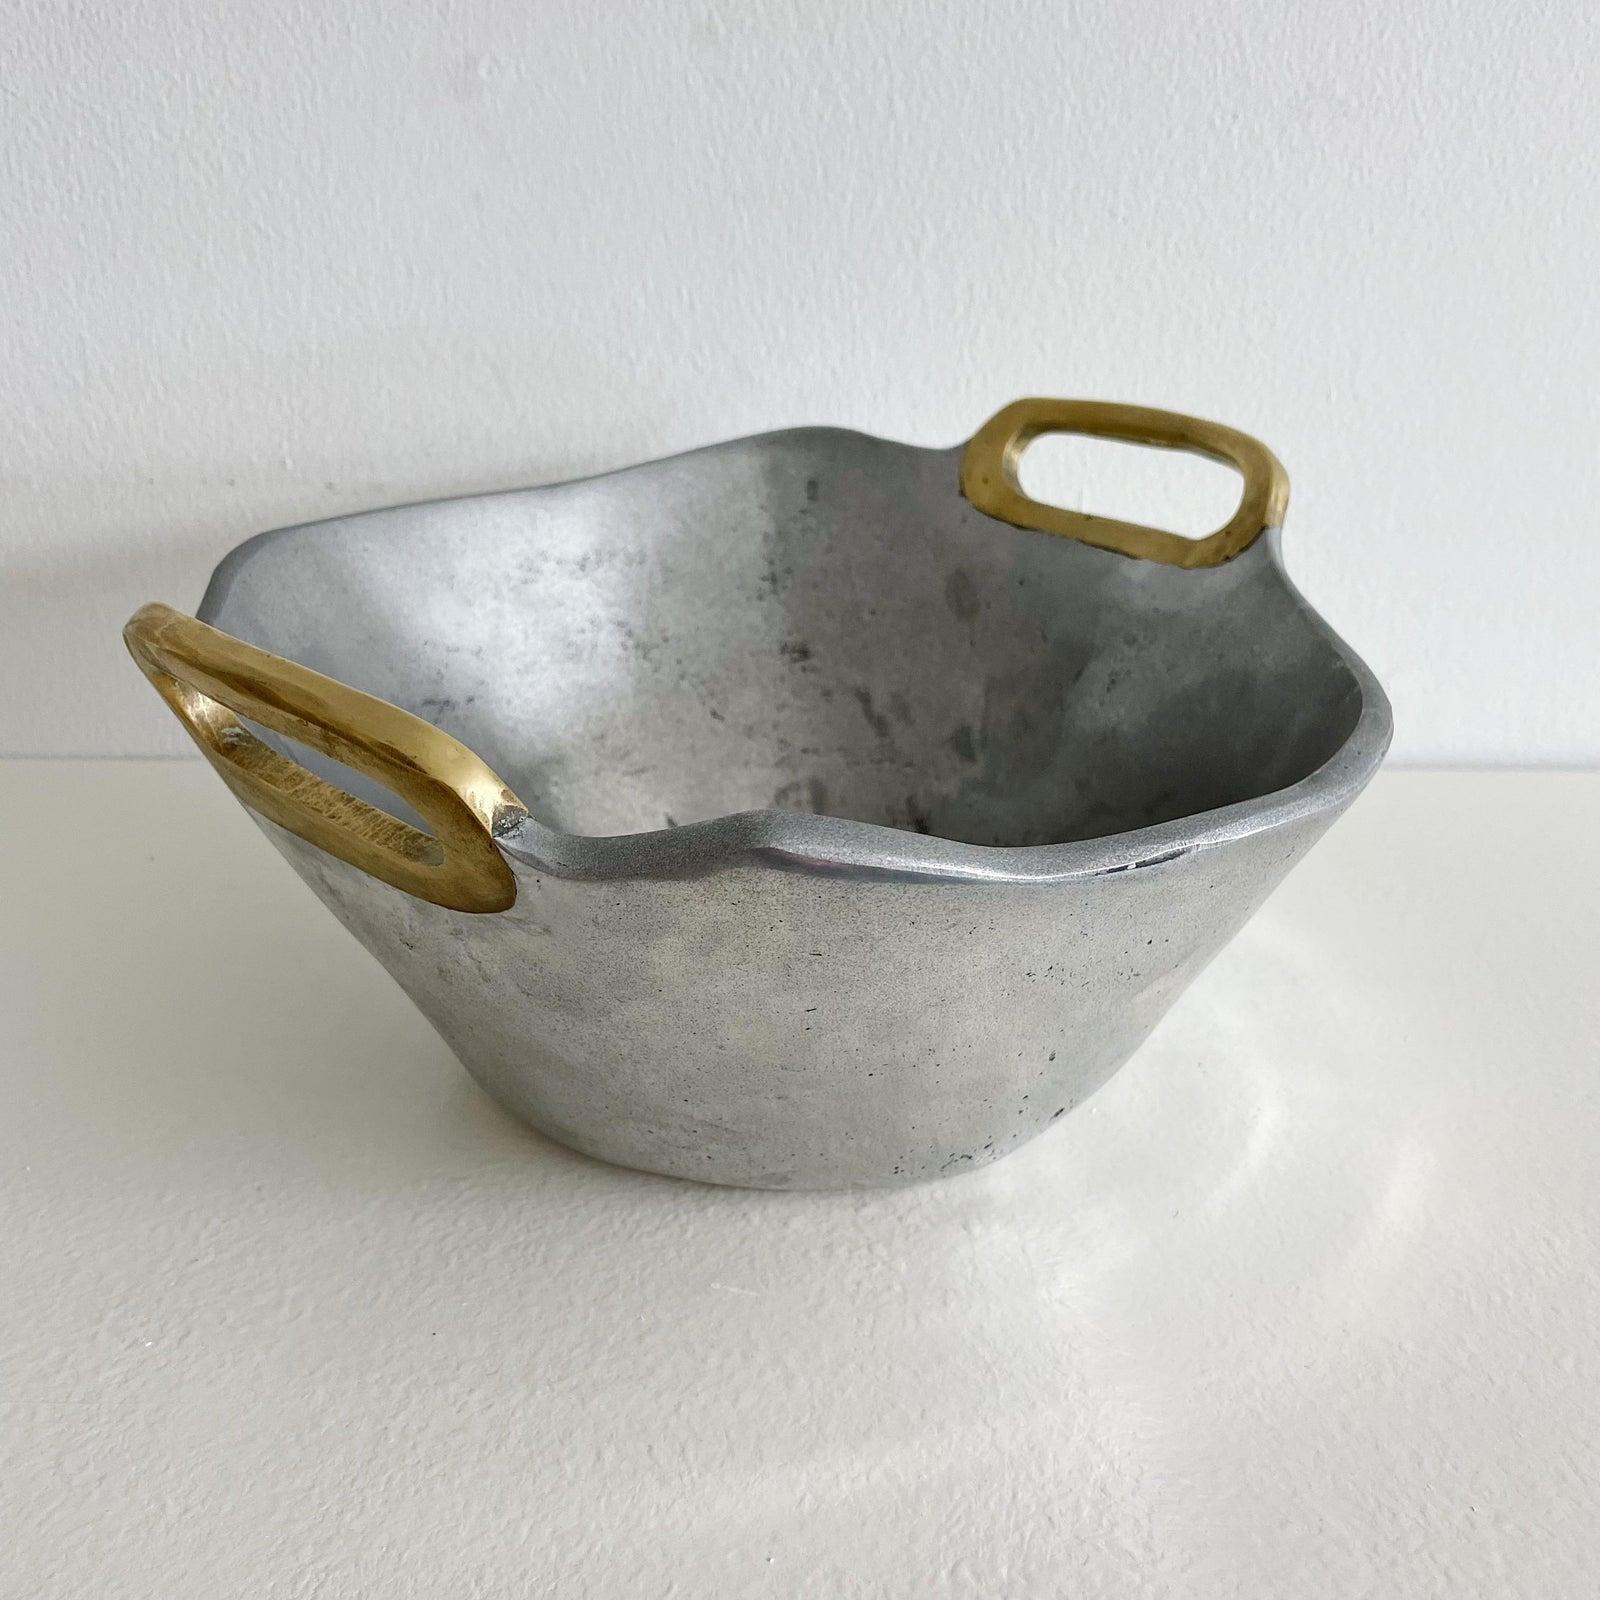 Brutalist style, mid century, solid aluminum bowl with double brass handles by Scottish artist David Marshall. The maker's mark is impressed on the inner surface of the higher brass handle. The bottom has the trademark leather base also with maker's